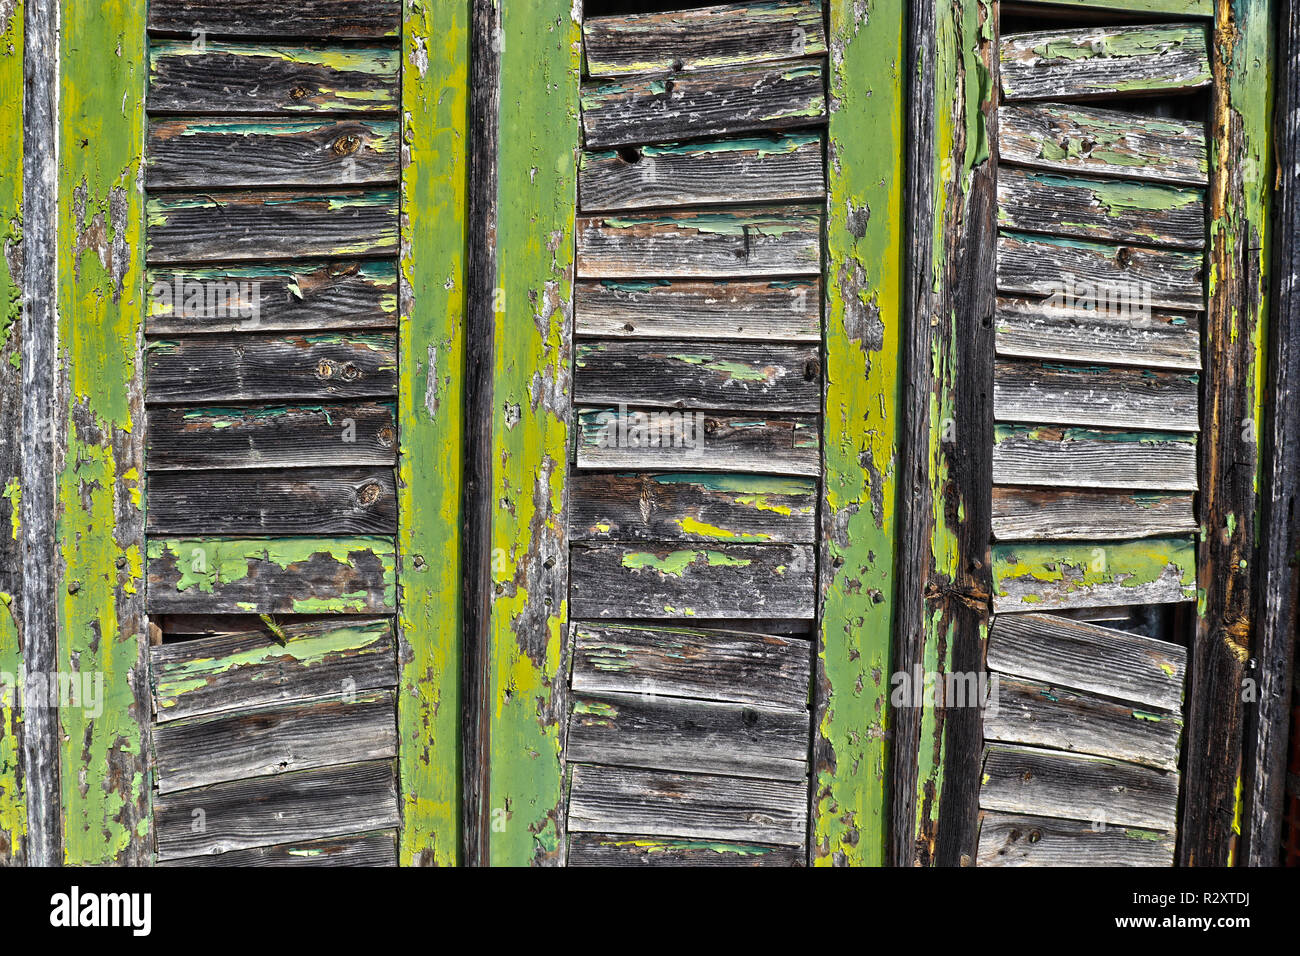 An abstract image depicting a delapidated door found in Barril de Alva, Central Portugal Stock Photo